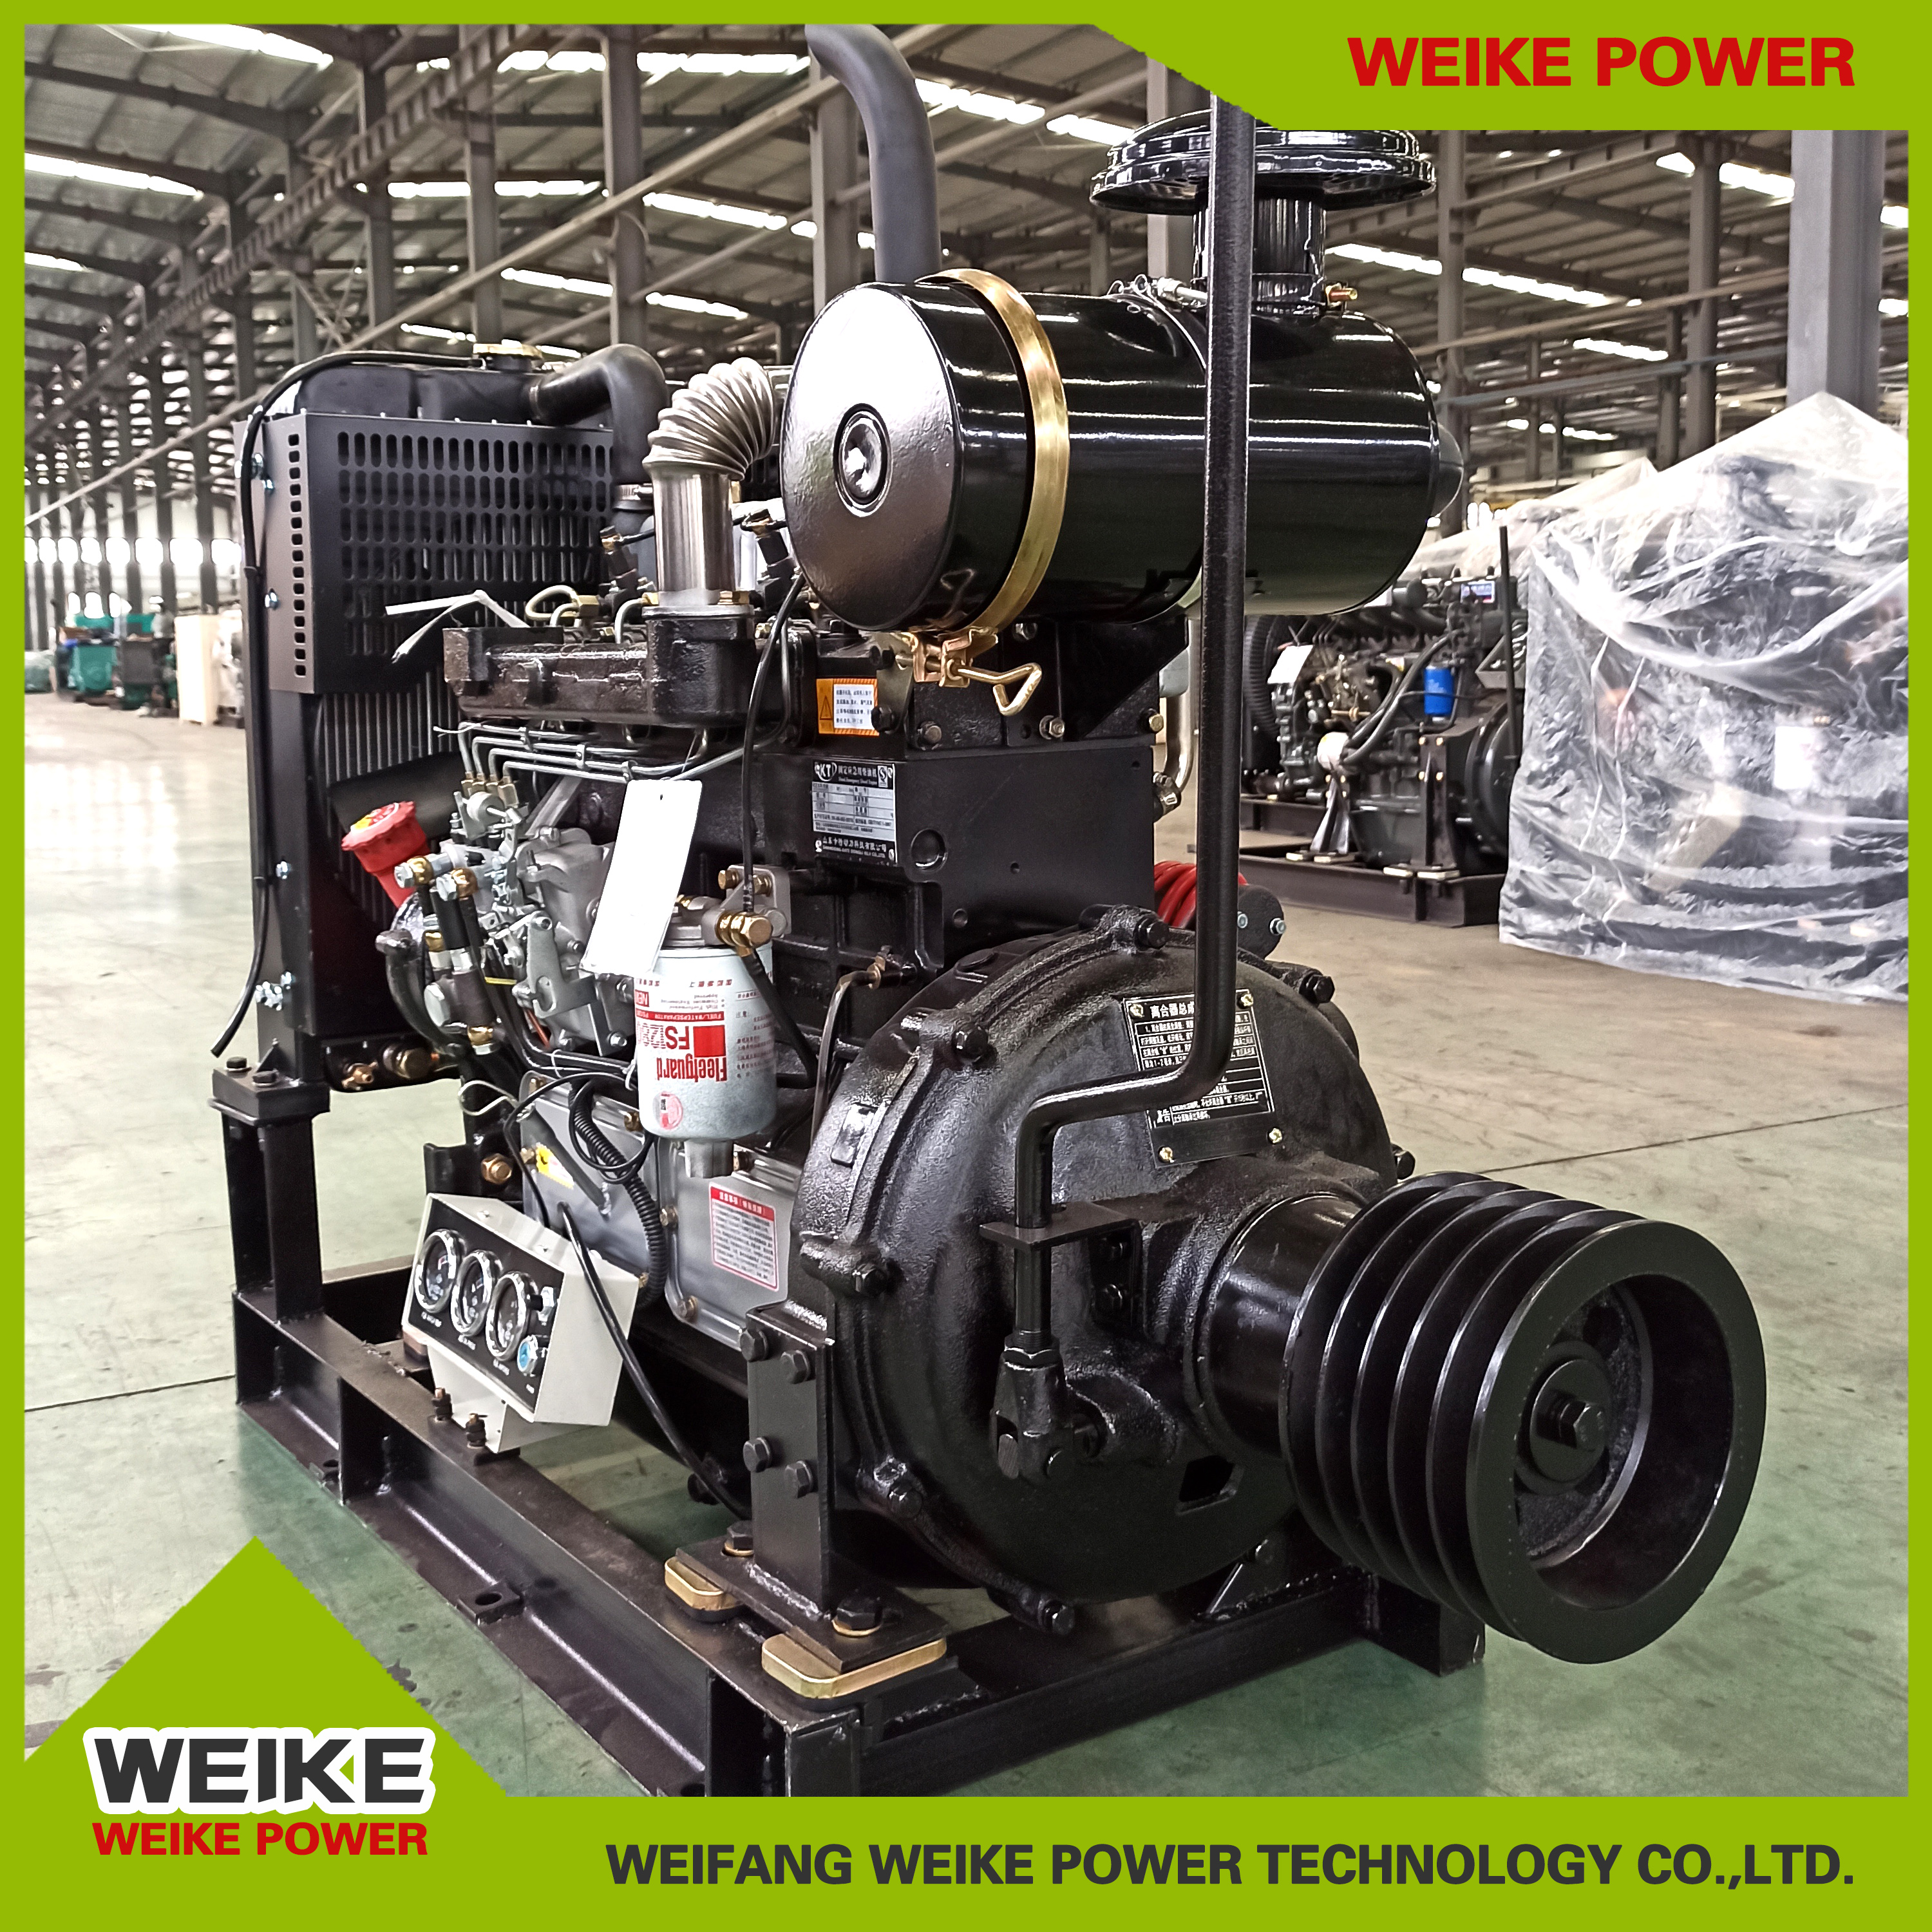 Diesel engine for fixed power